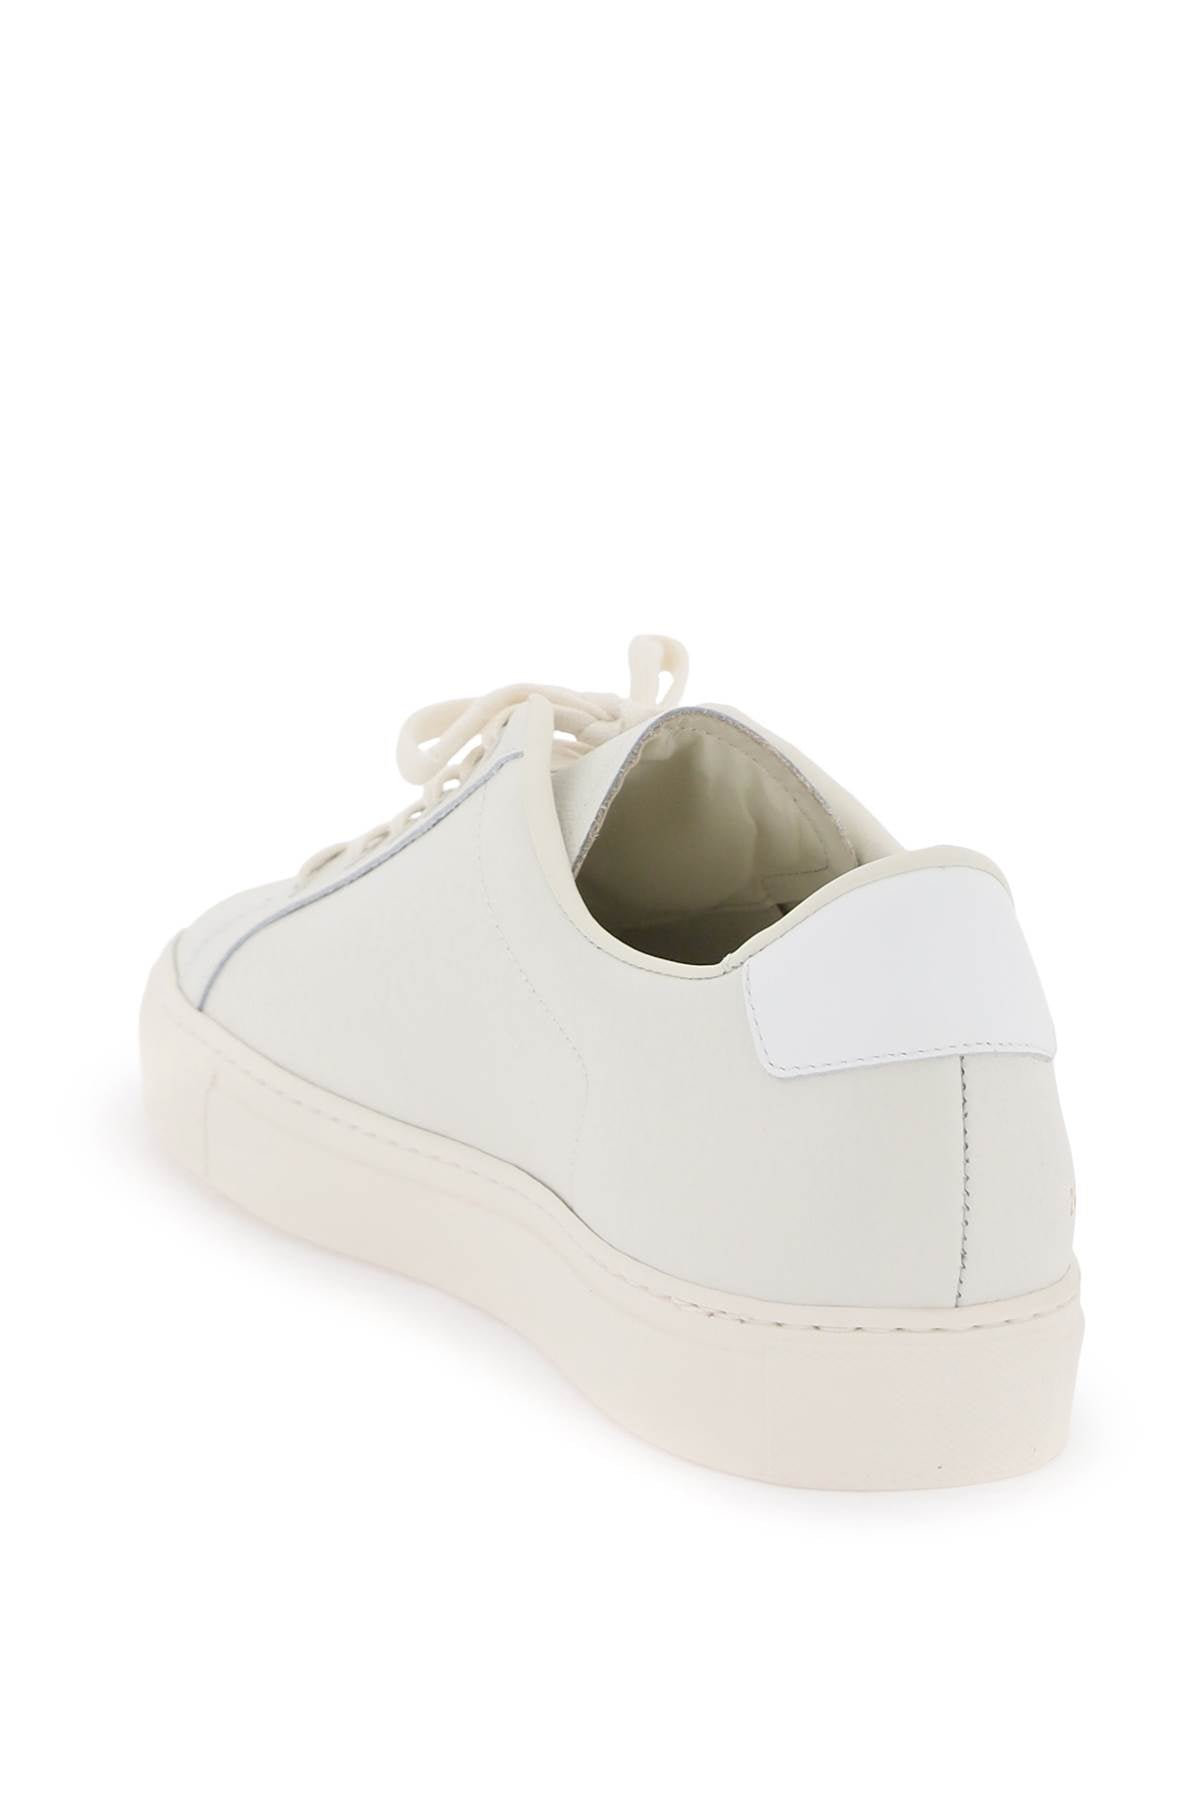 Shop Common Projects Sneakers Retro Low